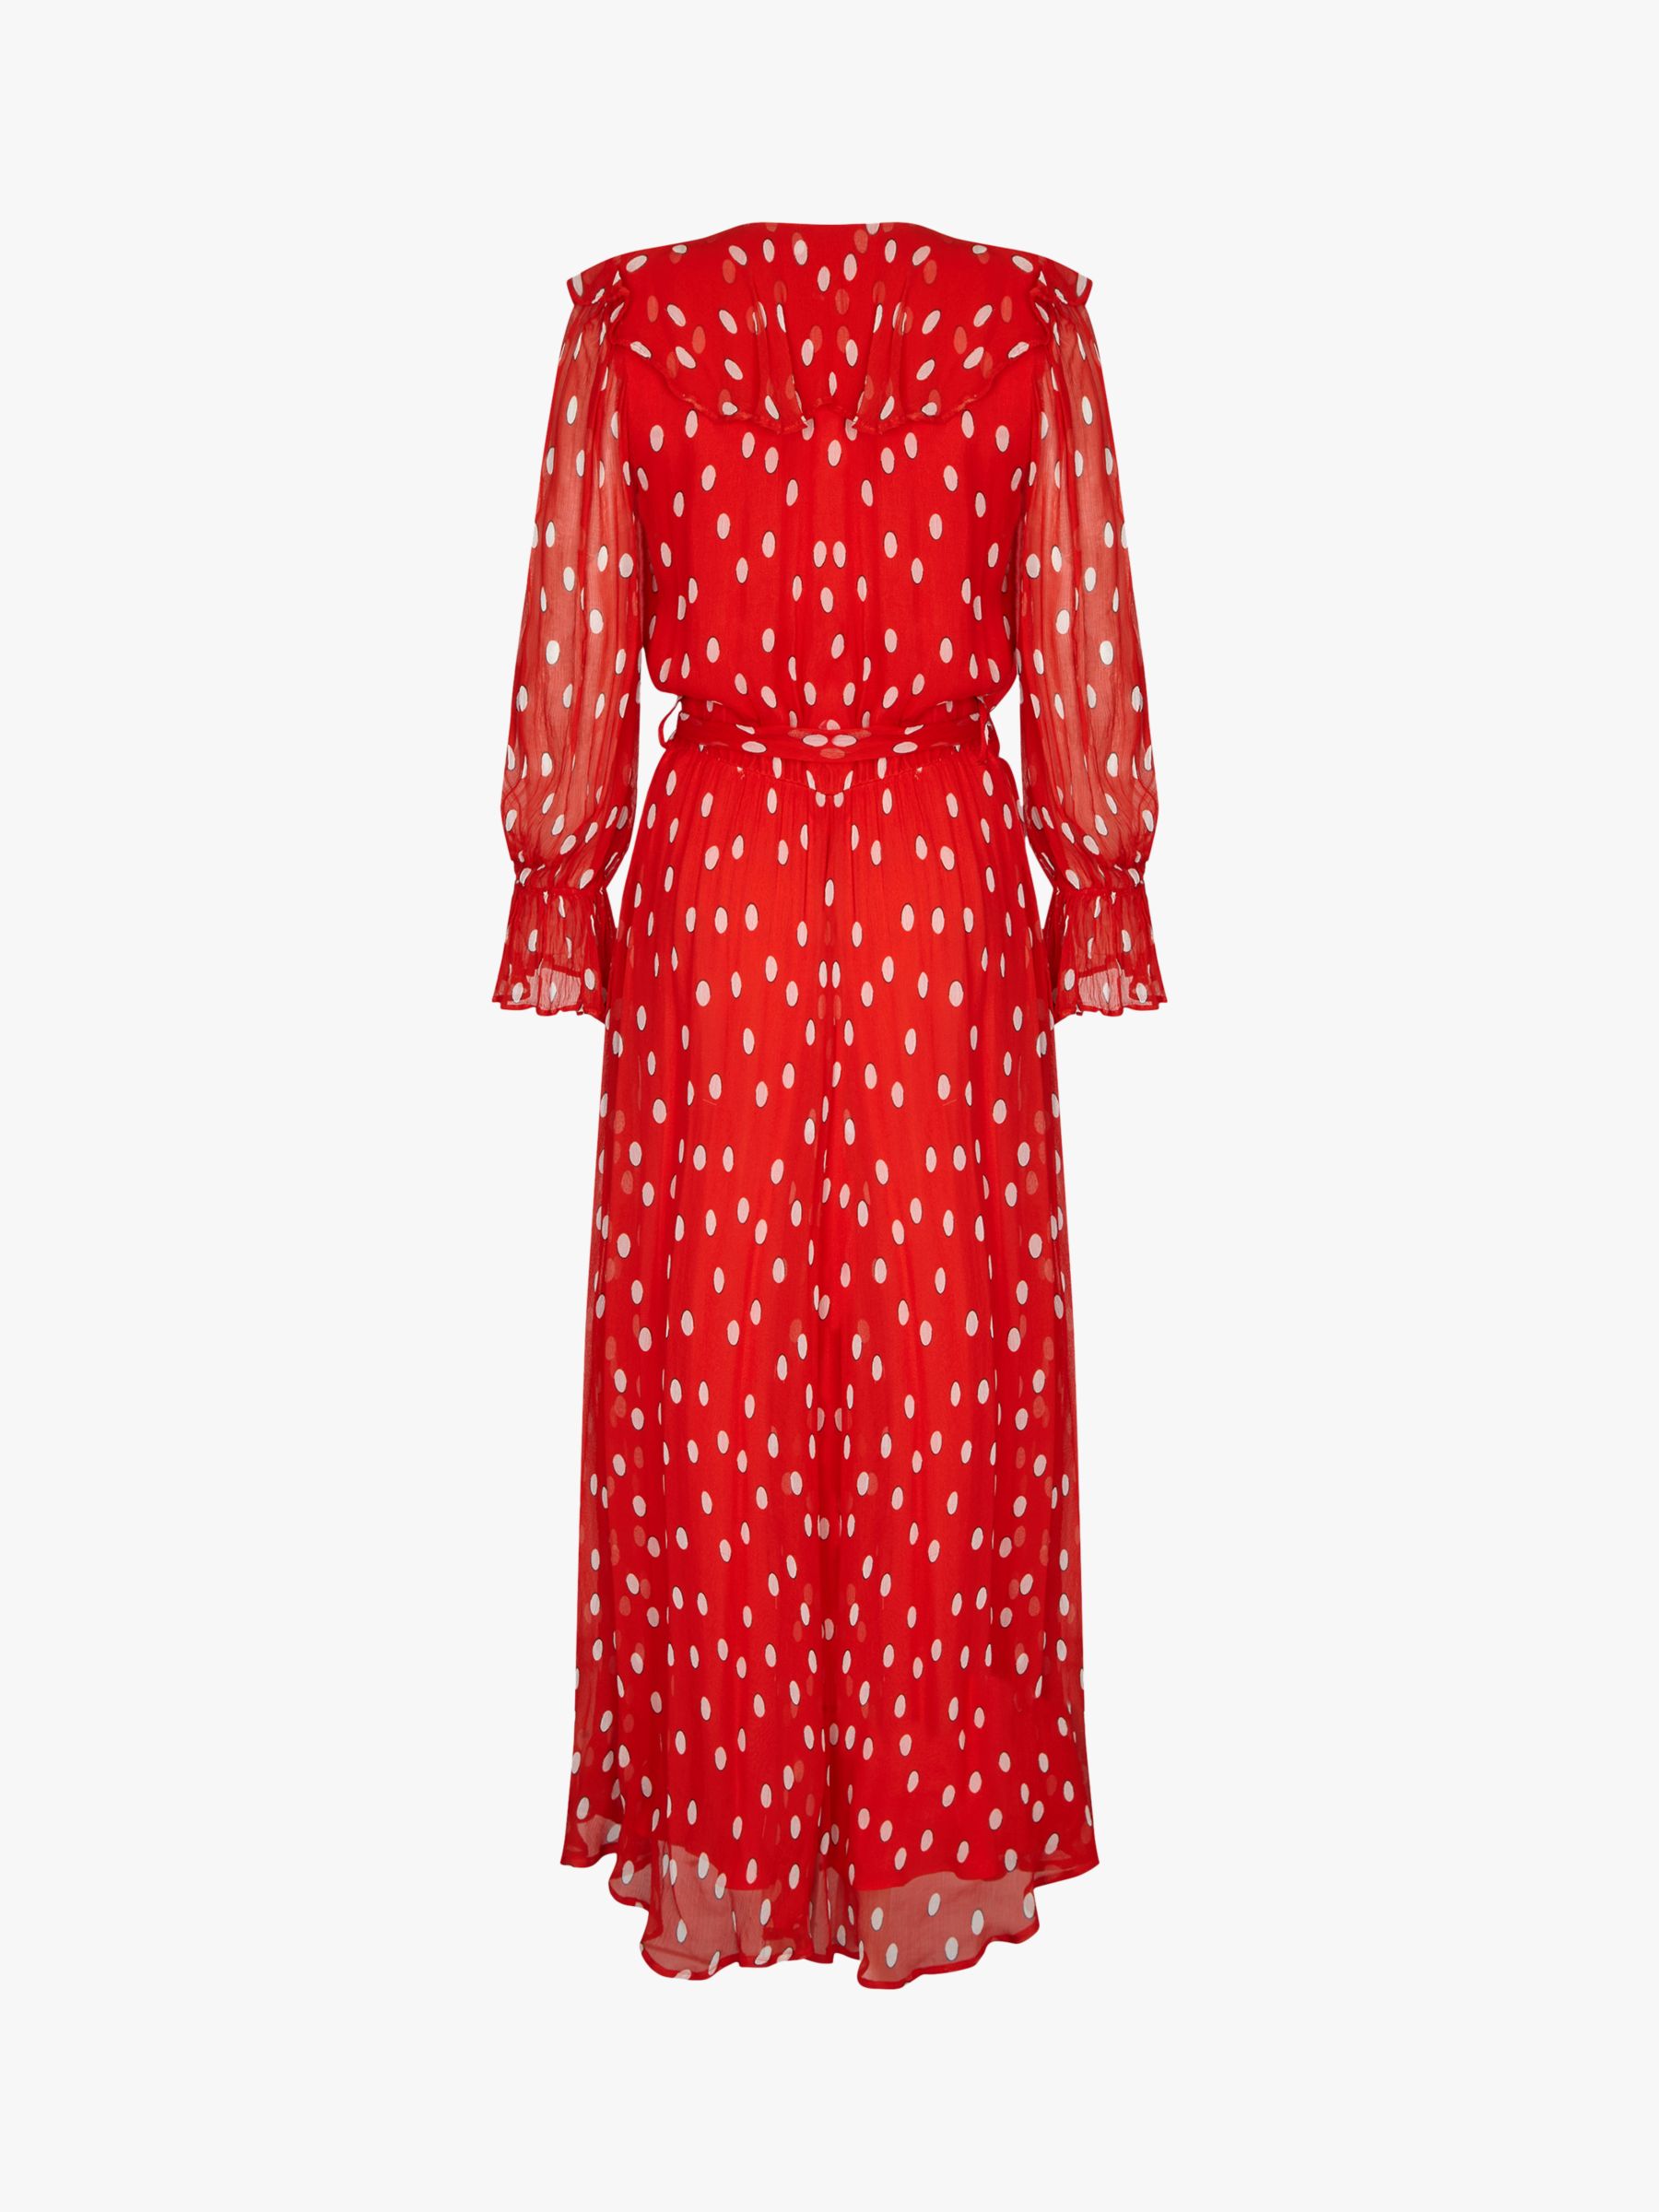 Ghost Everly Polka Dot Dress, Red at John Lewis & Partners